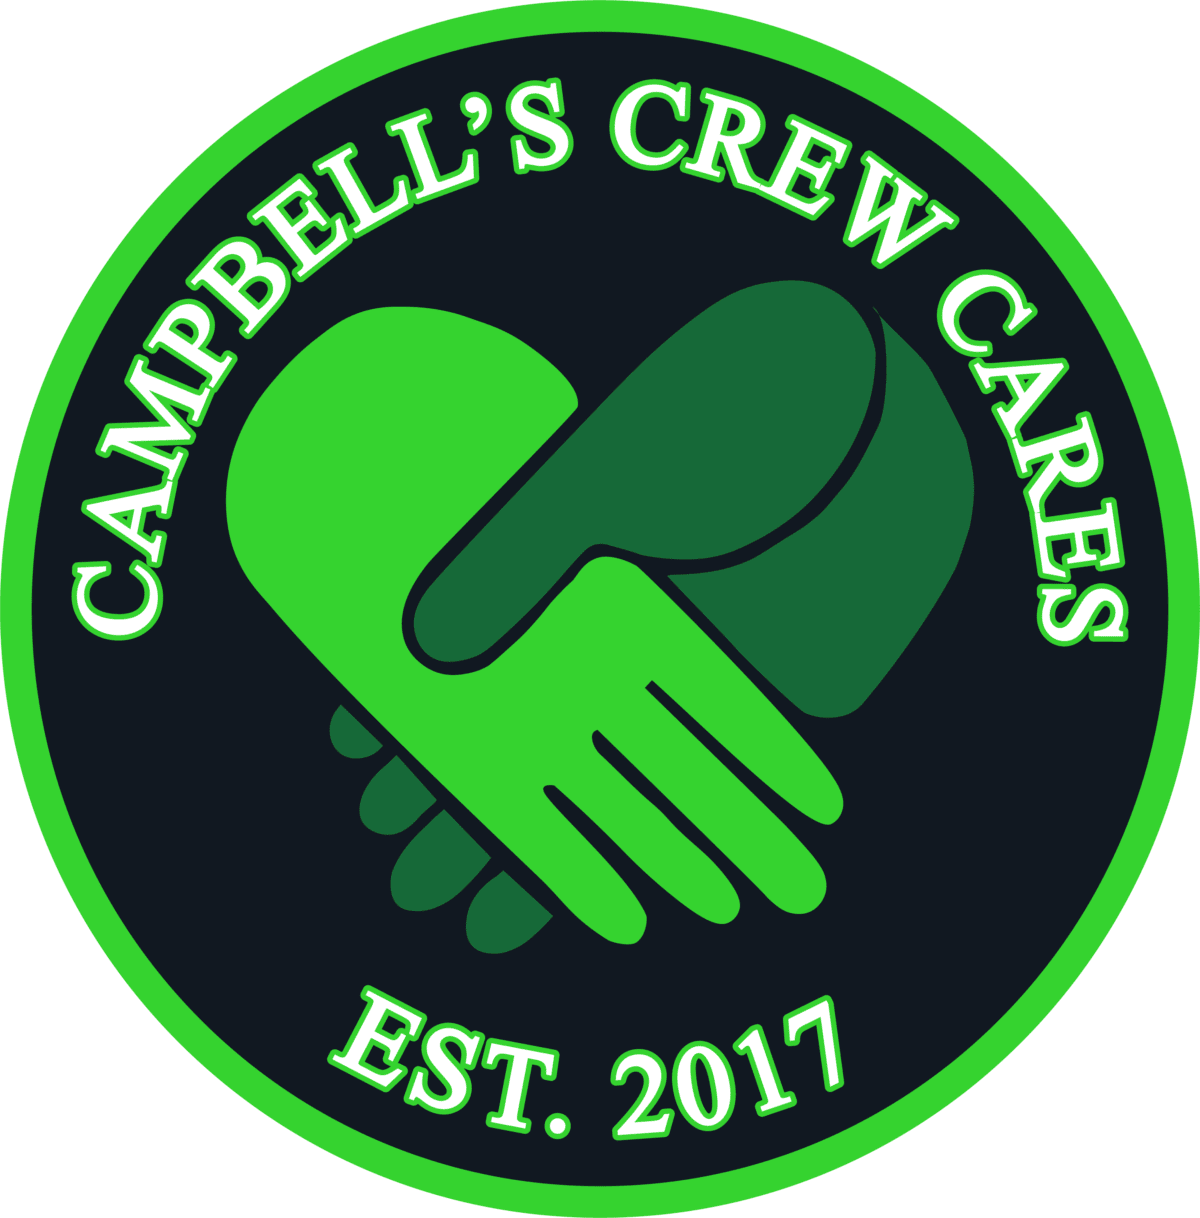 Campbell's Crew Cares